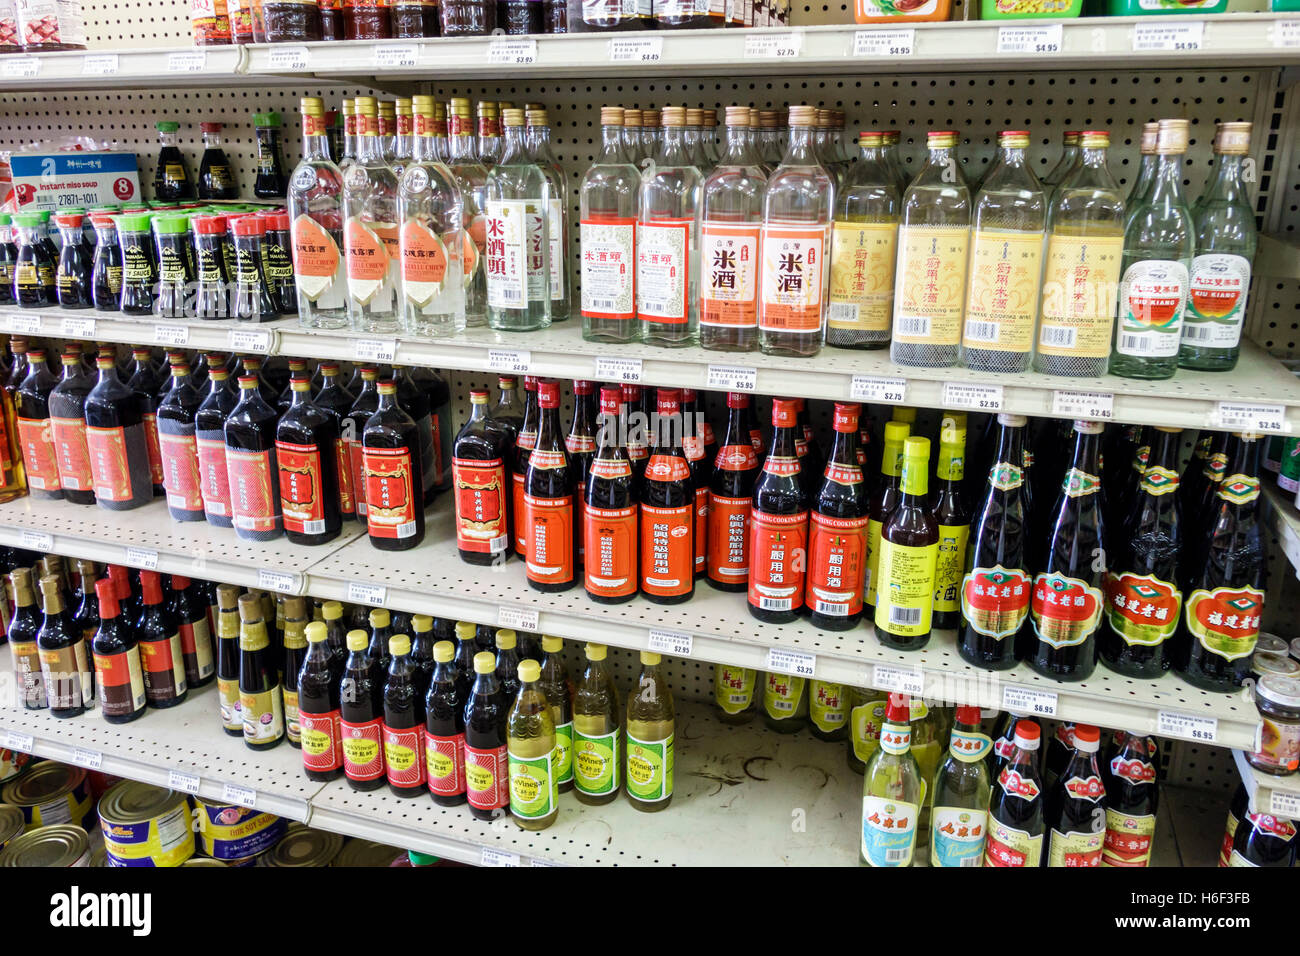 North Miami Beach Florida,PK Oriental Mart,grocery store,Asian cooking wine,Shaoxing,FL160807031 Stock Photo